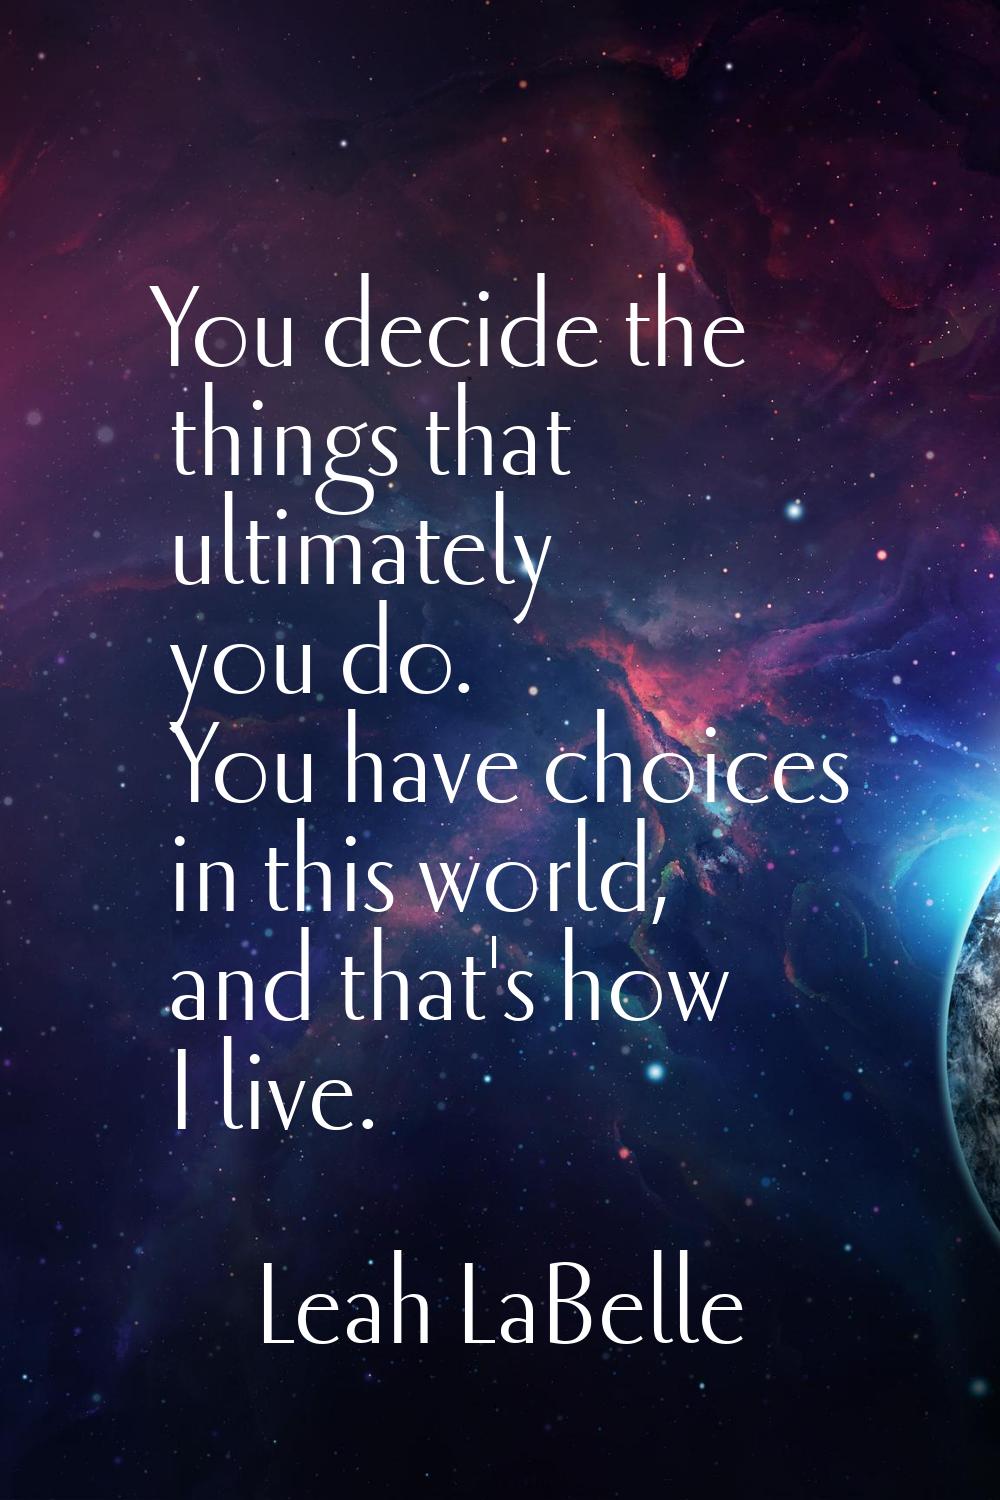 You decide the things that ultimately you do. You have choices in this world, and that's how I live